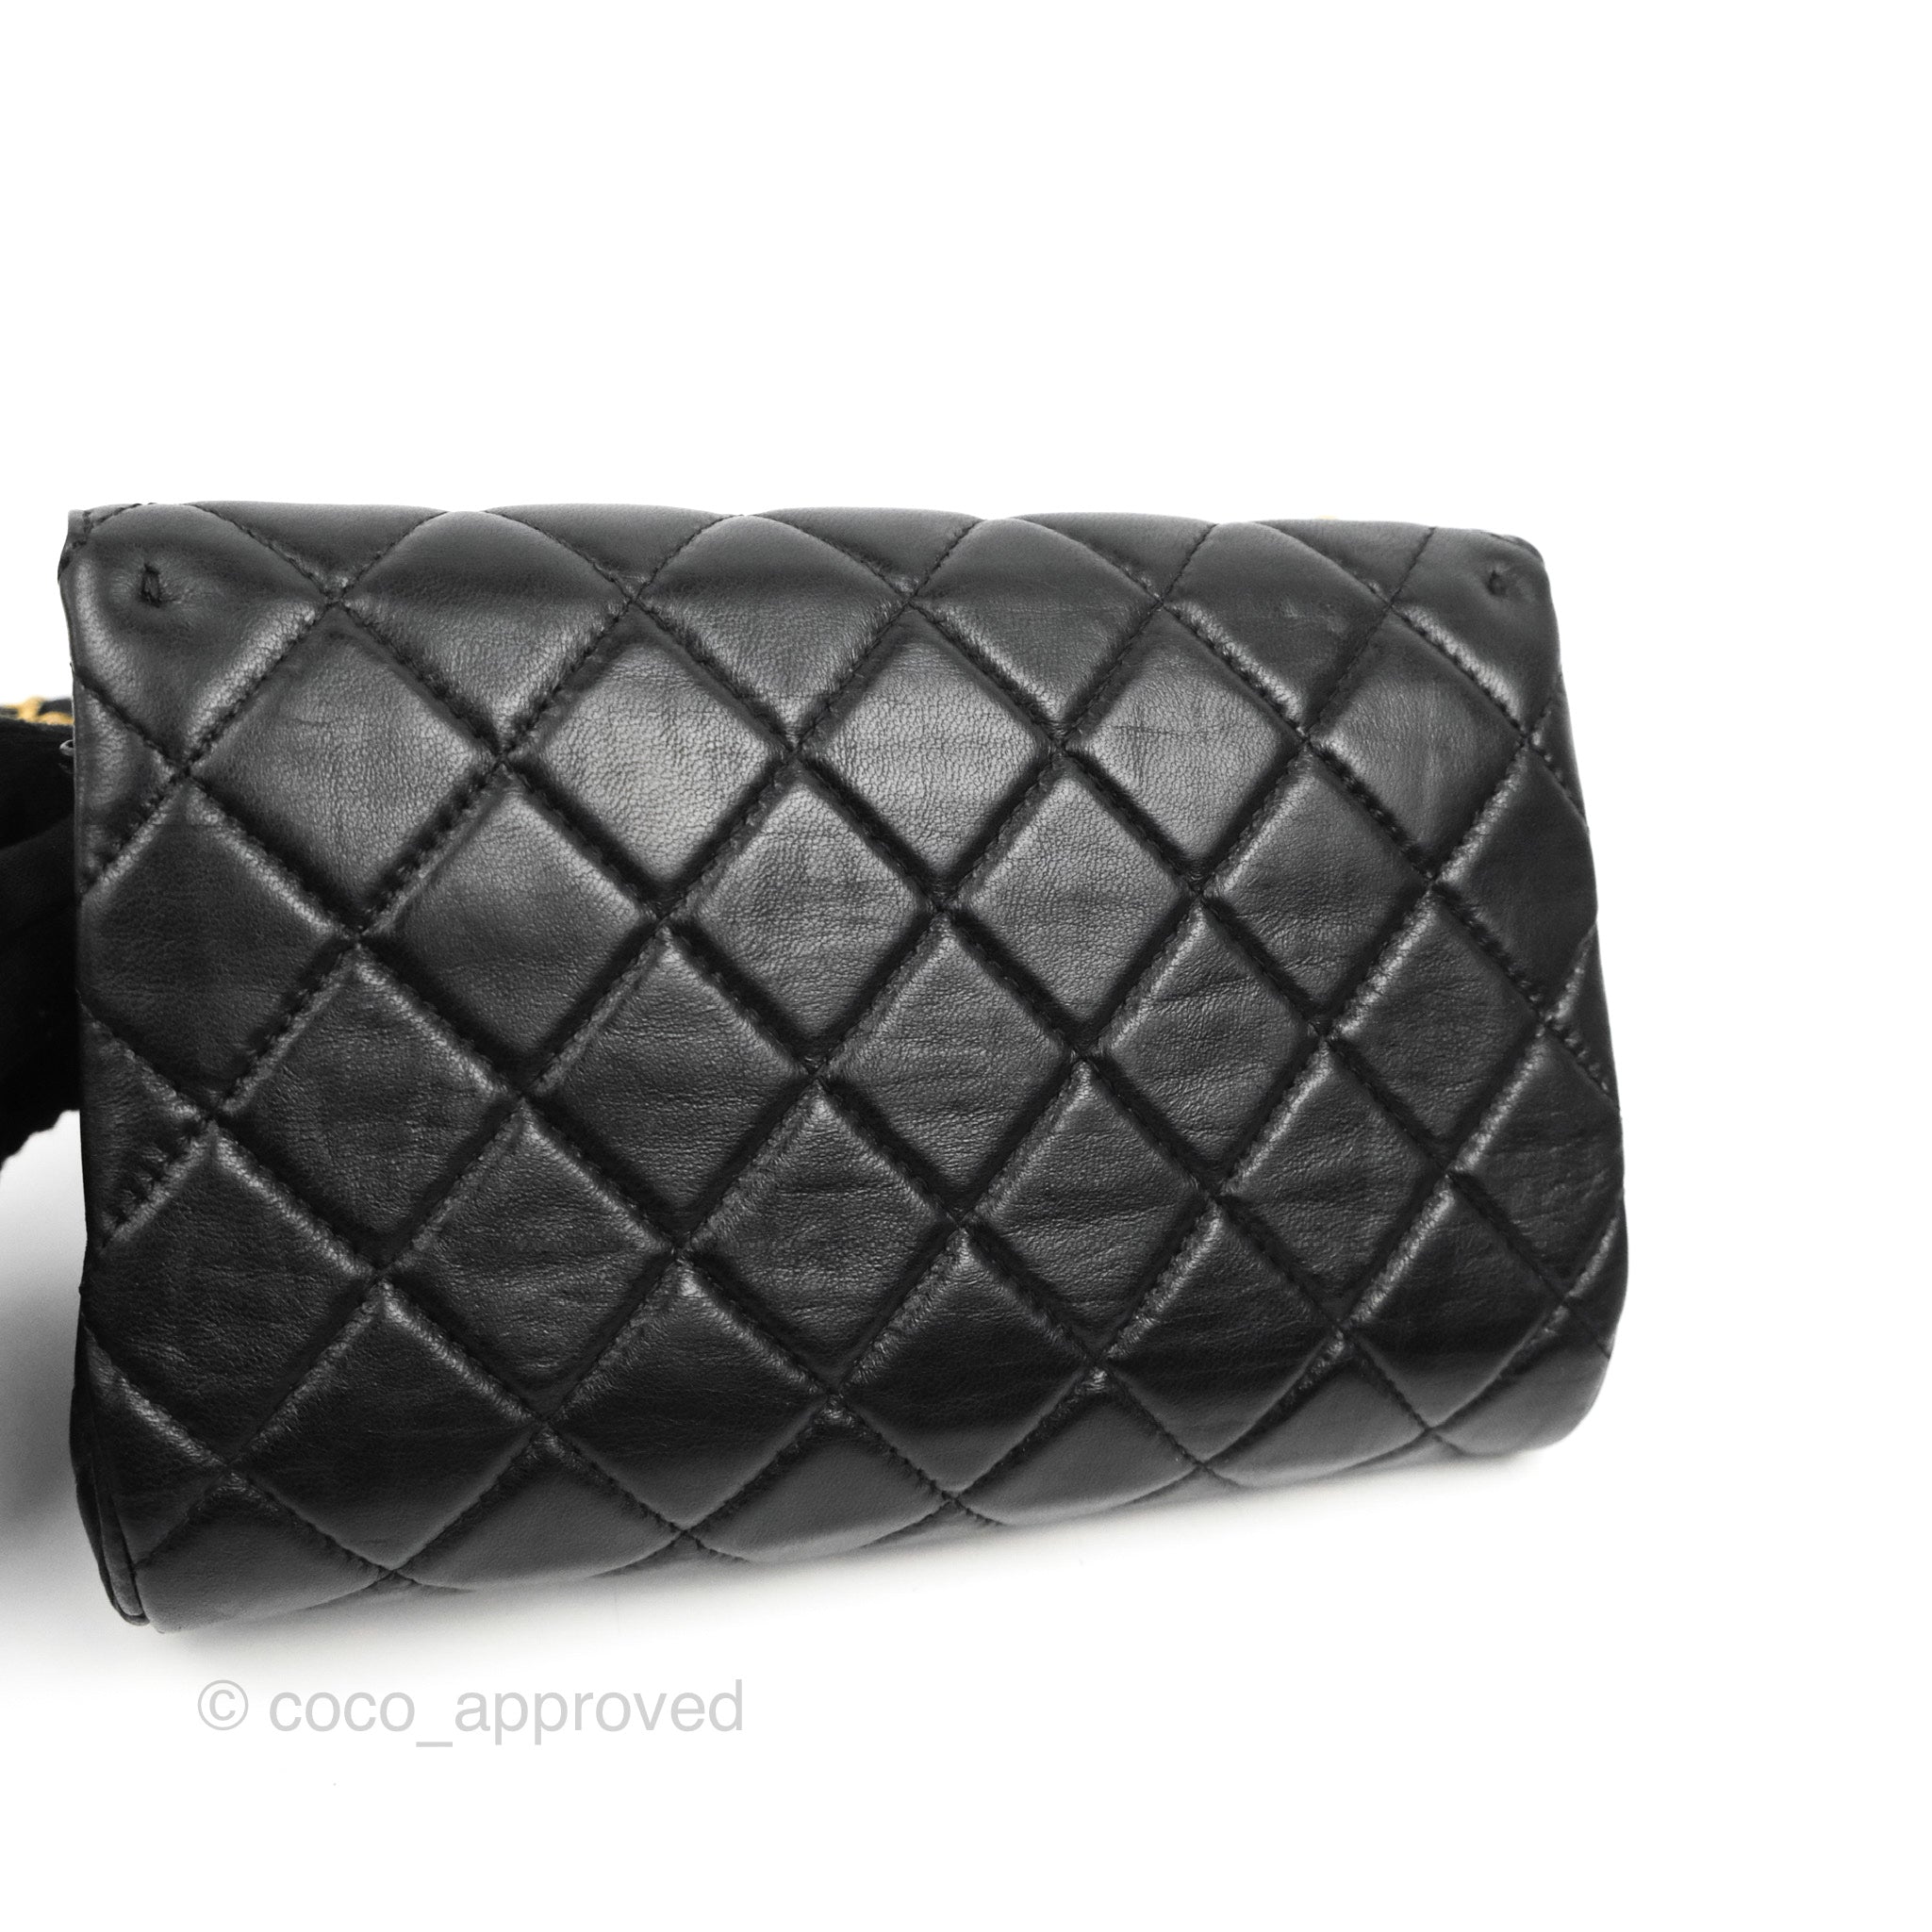 Chanel Logo Enchained Flap Bag Quilted Calfskin Medium Black 10322581